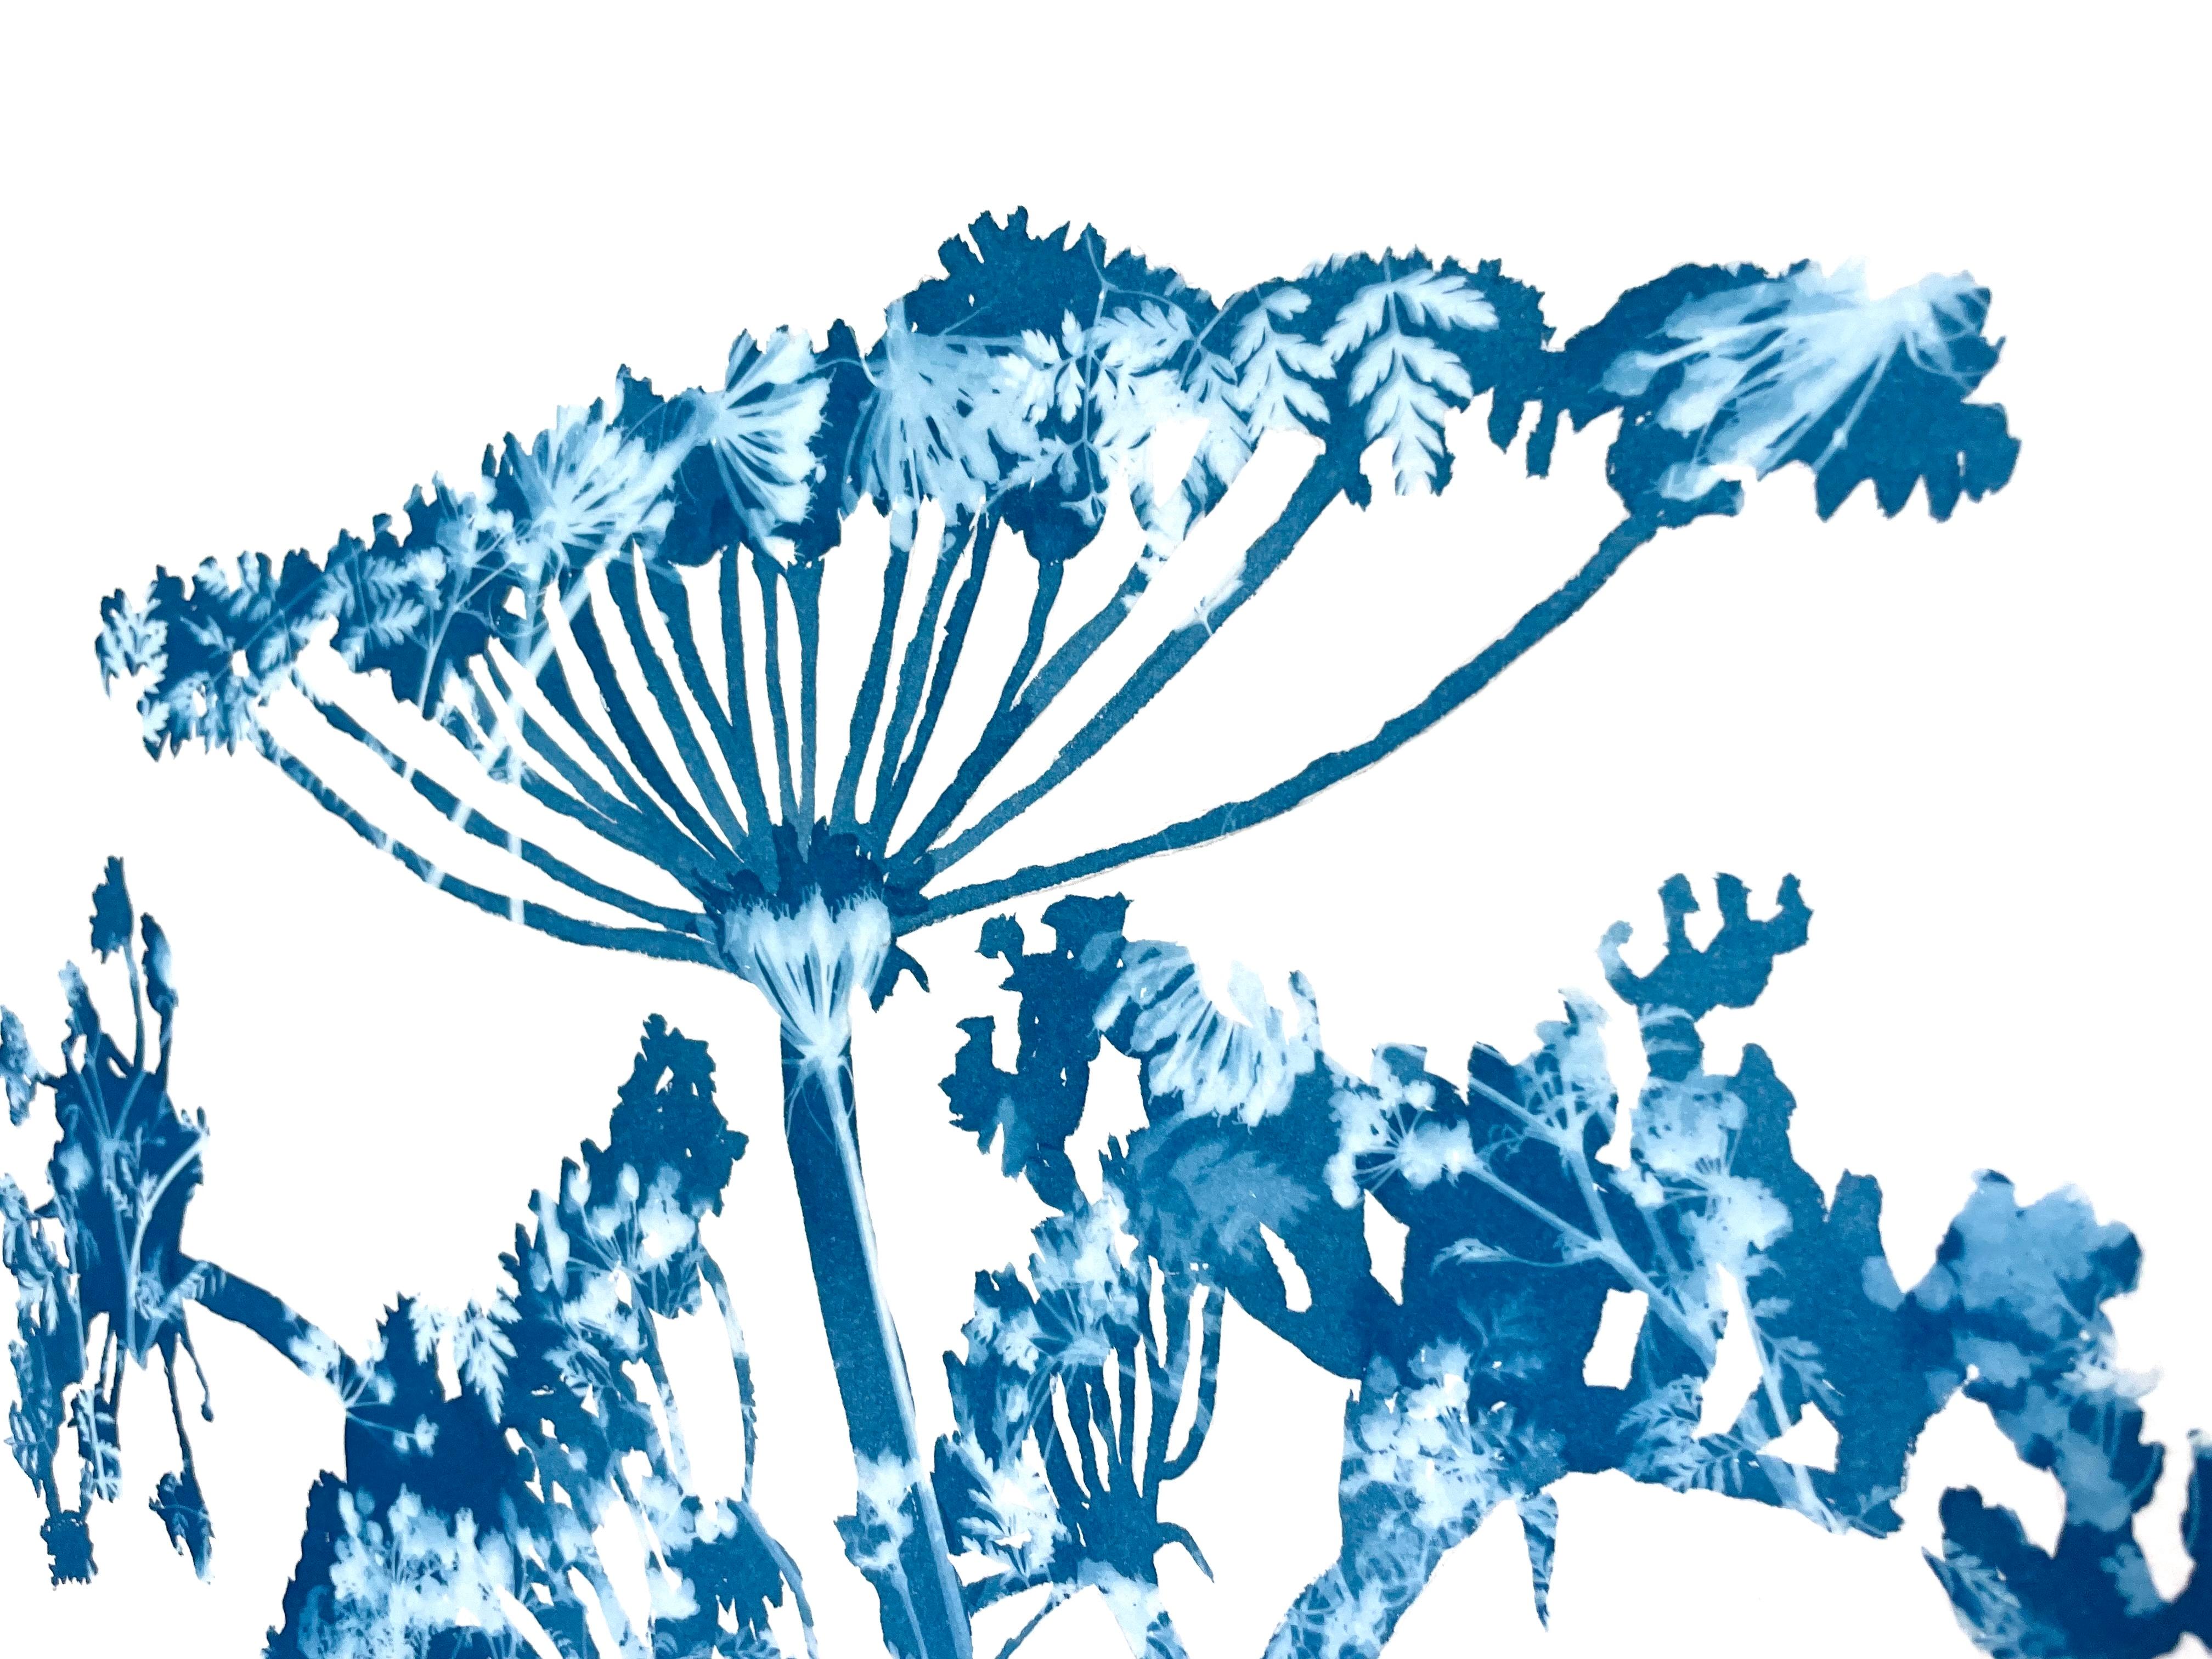 This is a combination of painting and photography, the anqtique cyanotype process. The silhouette of the plant was first drawn, then painted not with ink or paint, but with light-sensitive photo emulsion. The blue and white pattern seen in each leaf